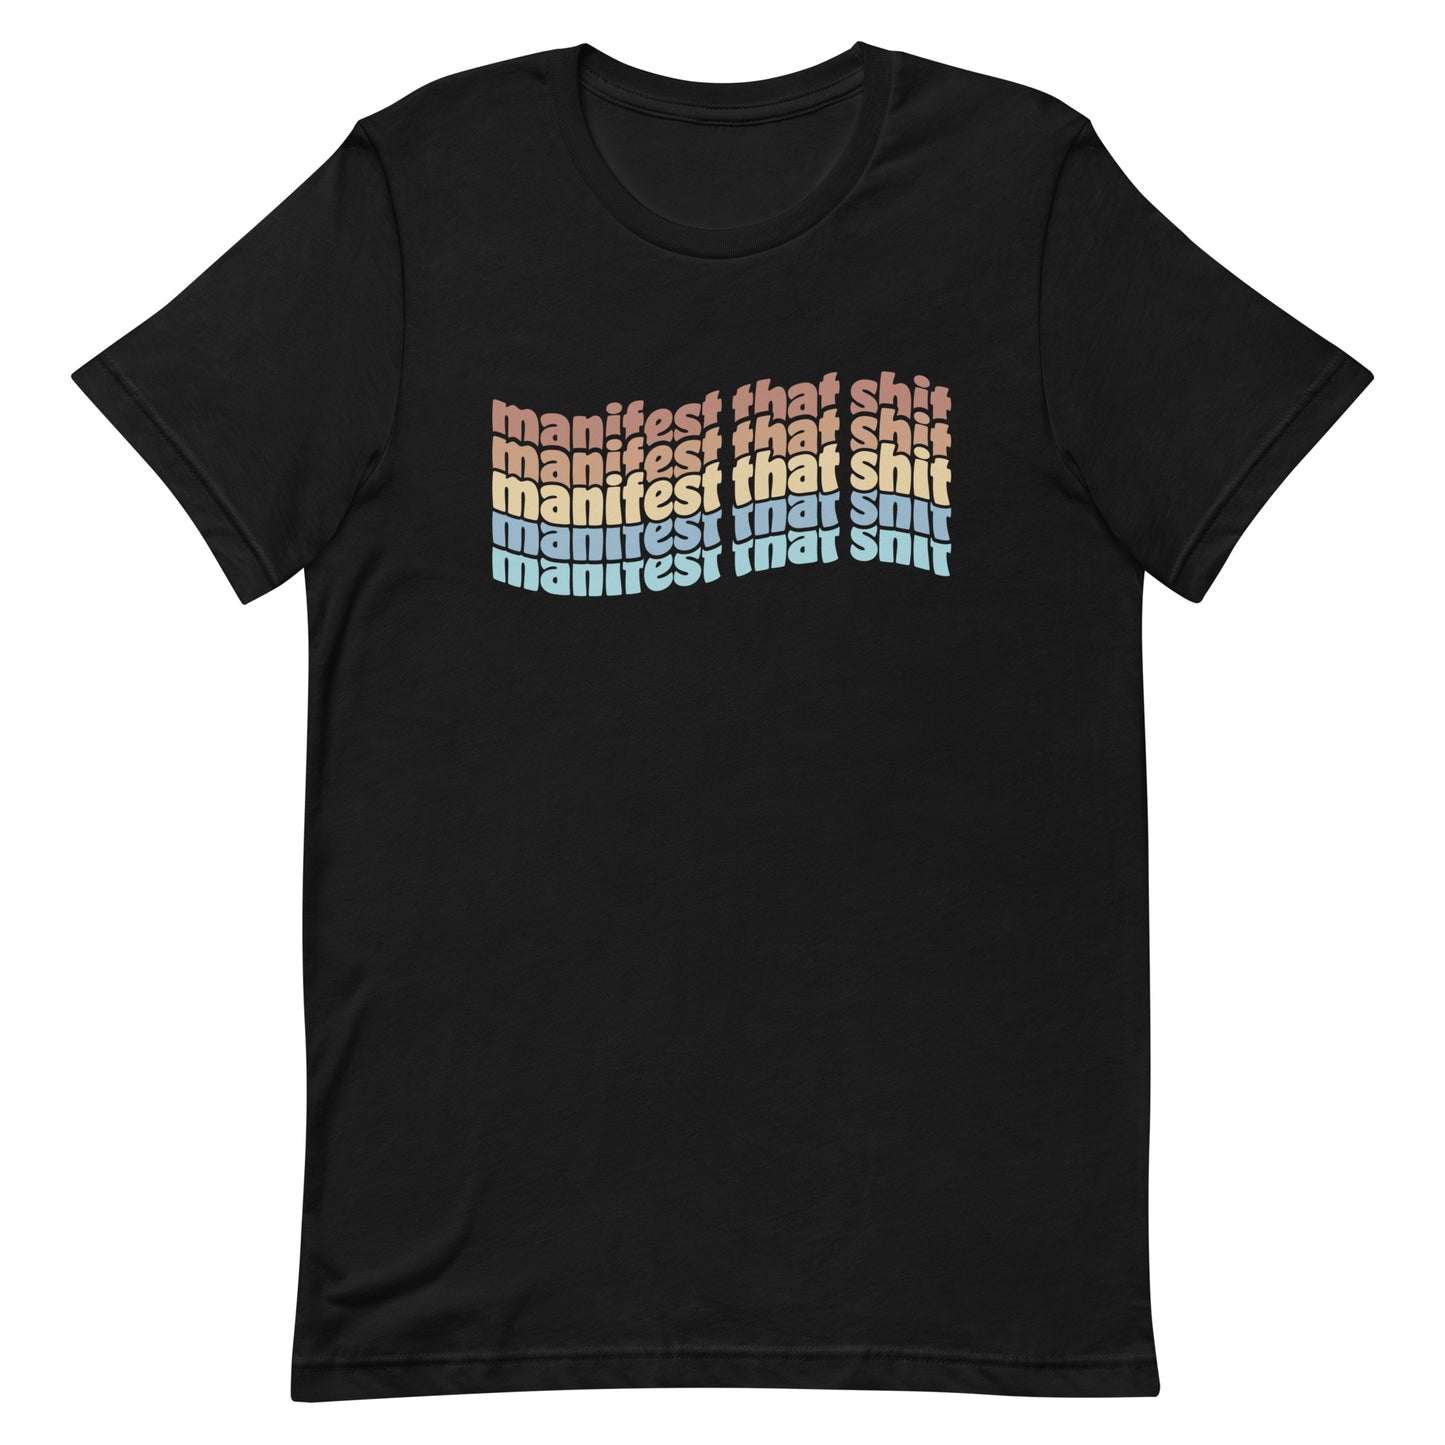 A black crewneck t-shirt featuring stacked text that reads "manifest that shit" in a rainbow of colors.